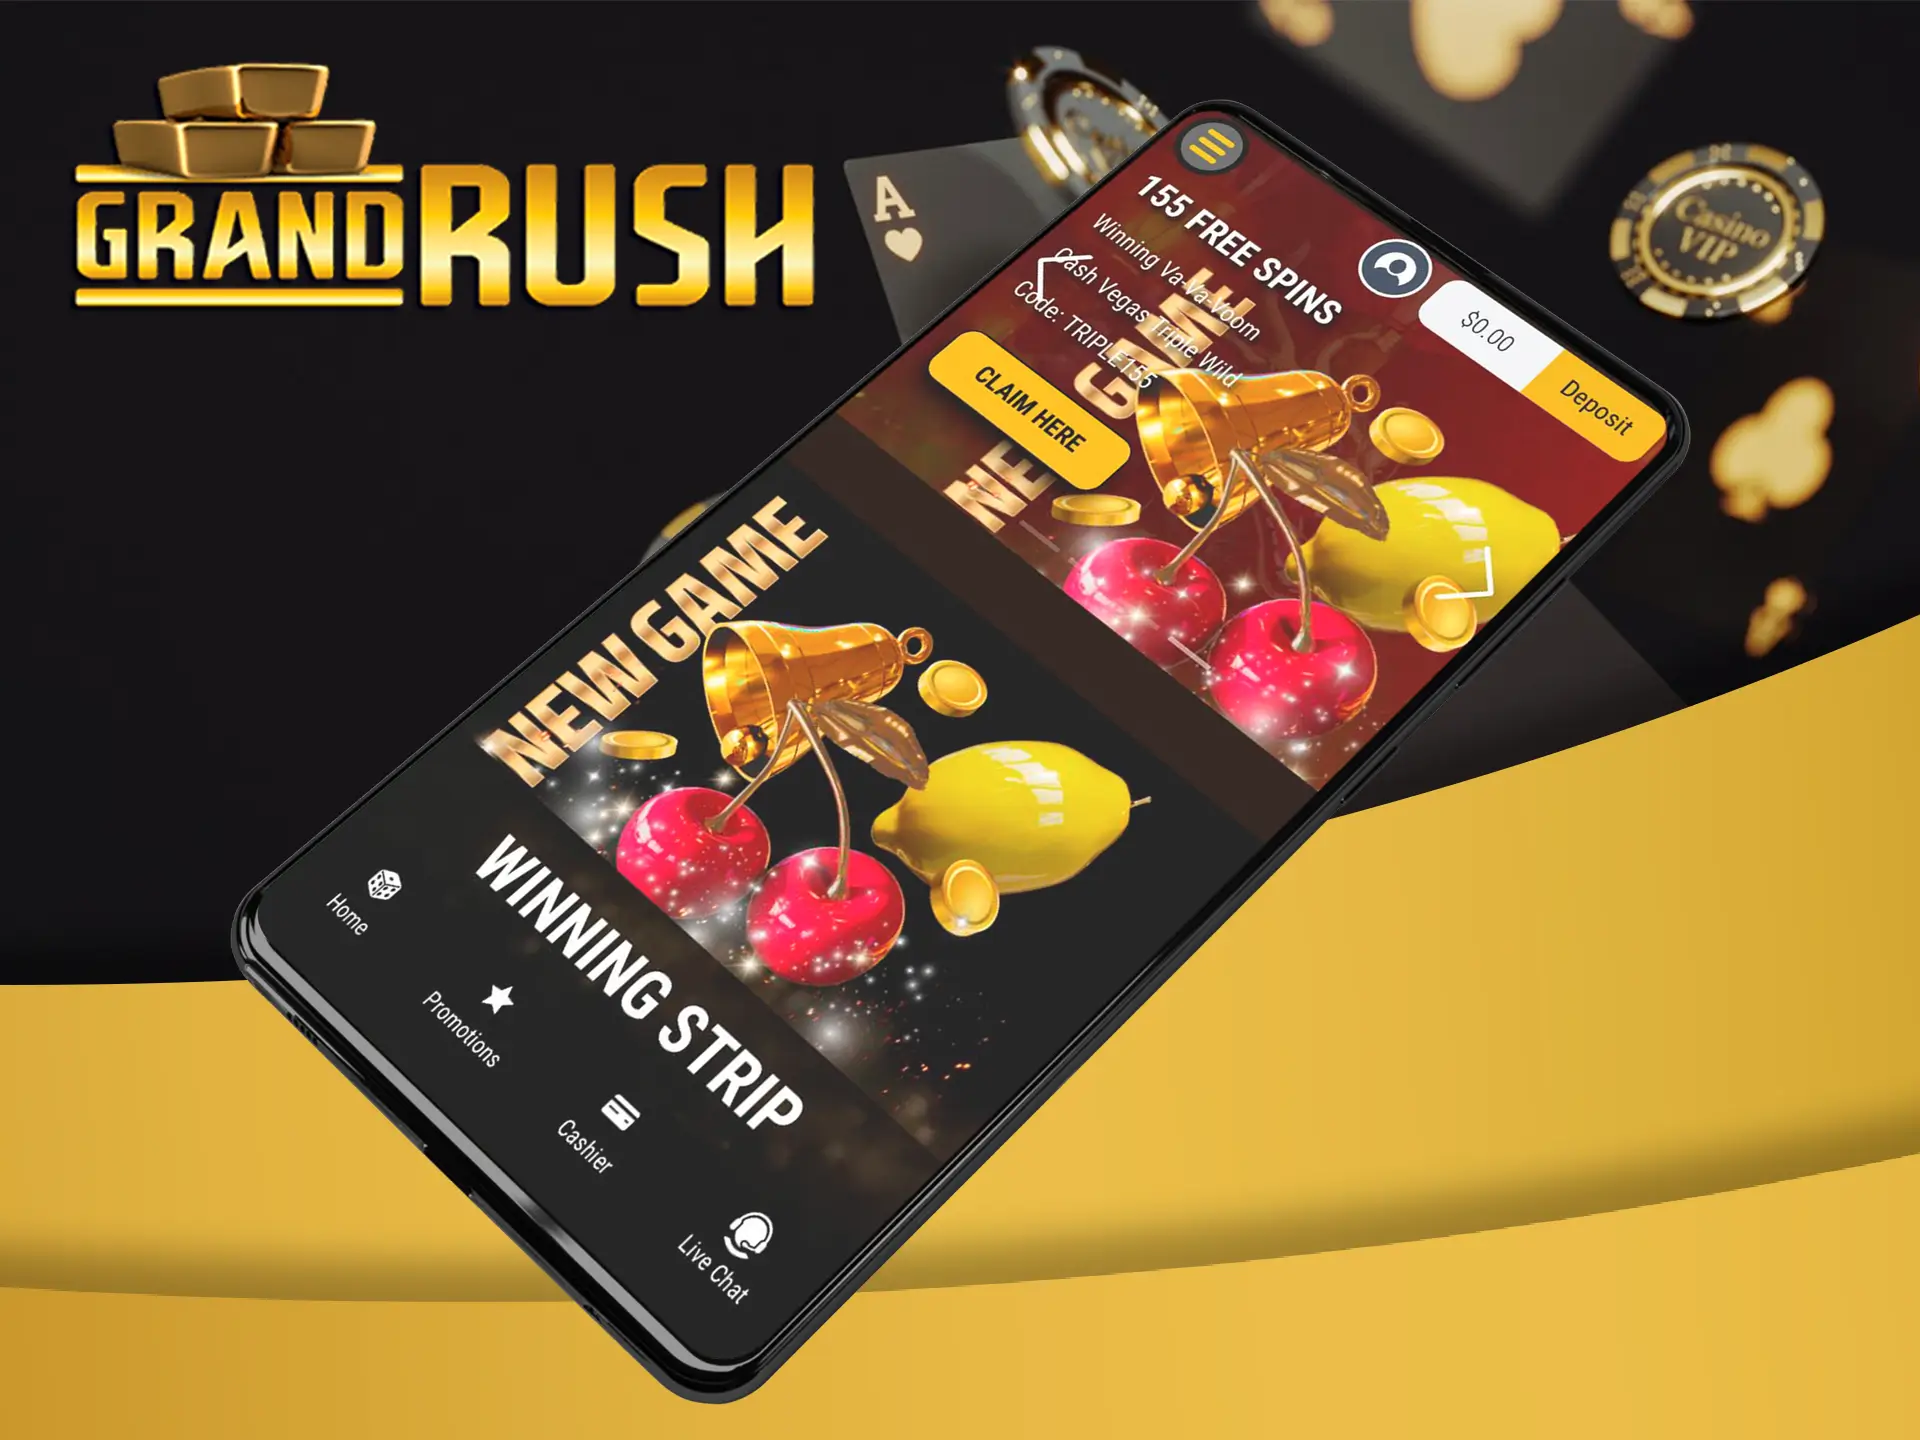 Grand Rush mobile version has a lot of benefits before other casinos in Australia.